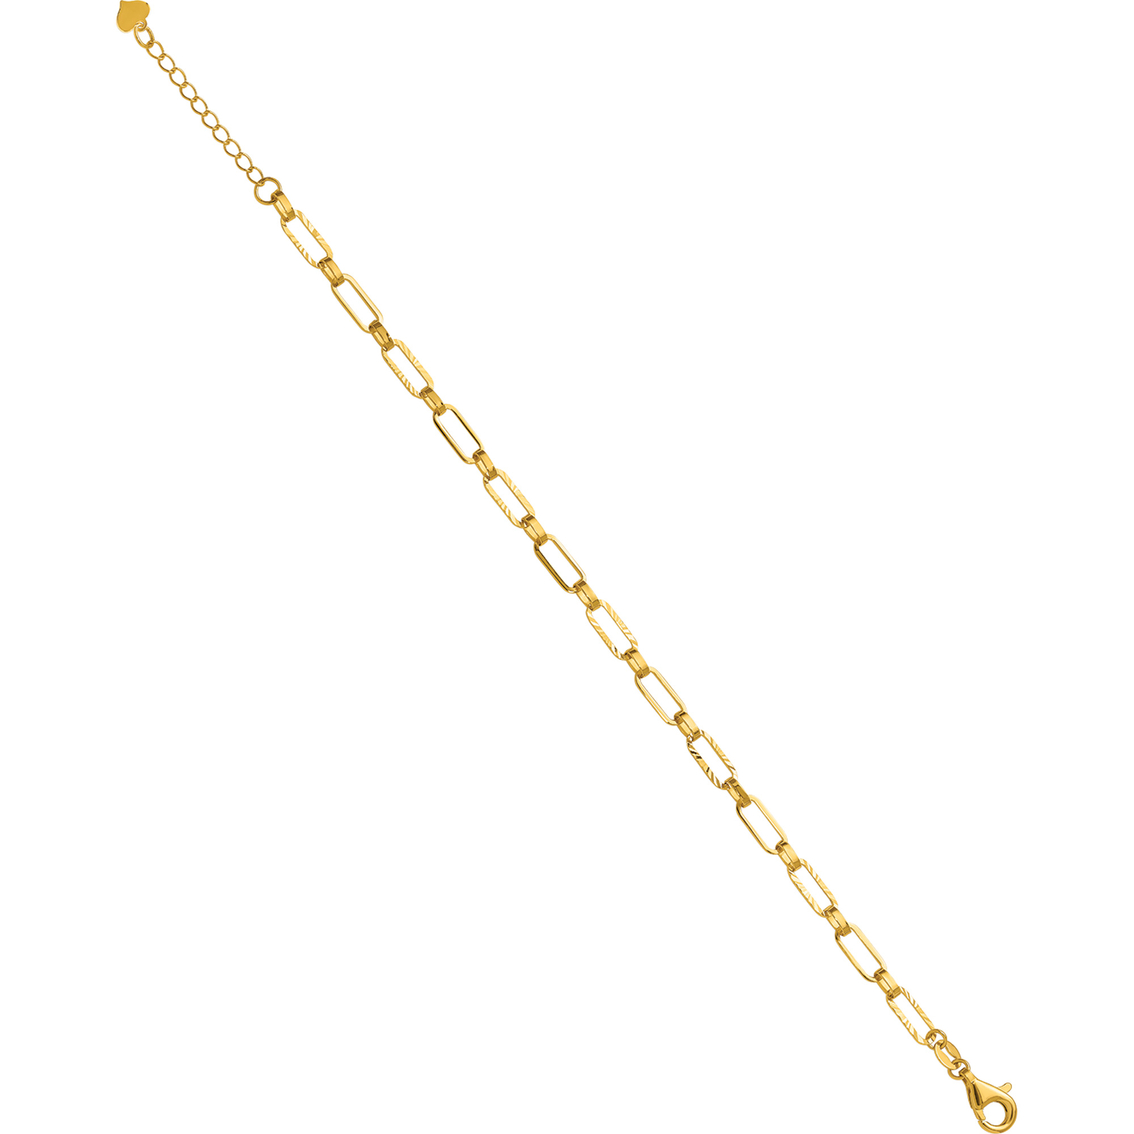 24K Pure Gold 24K Yellow Gold Paperclip Link Bracelet - Image 3 of 5